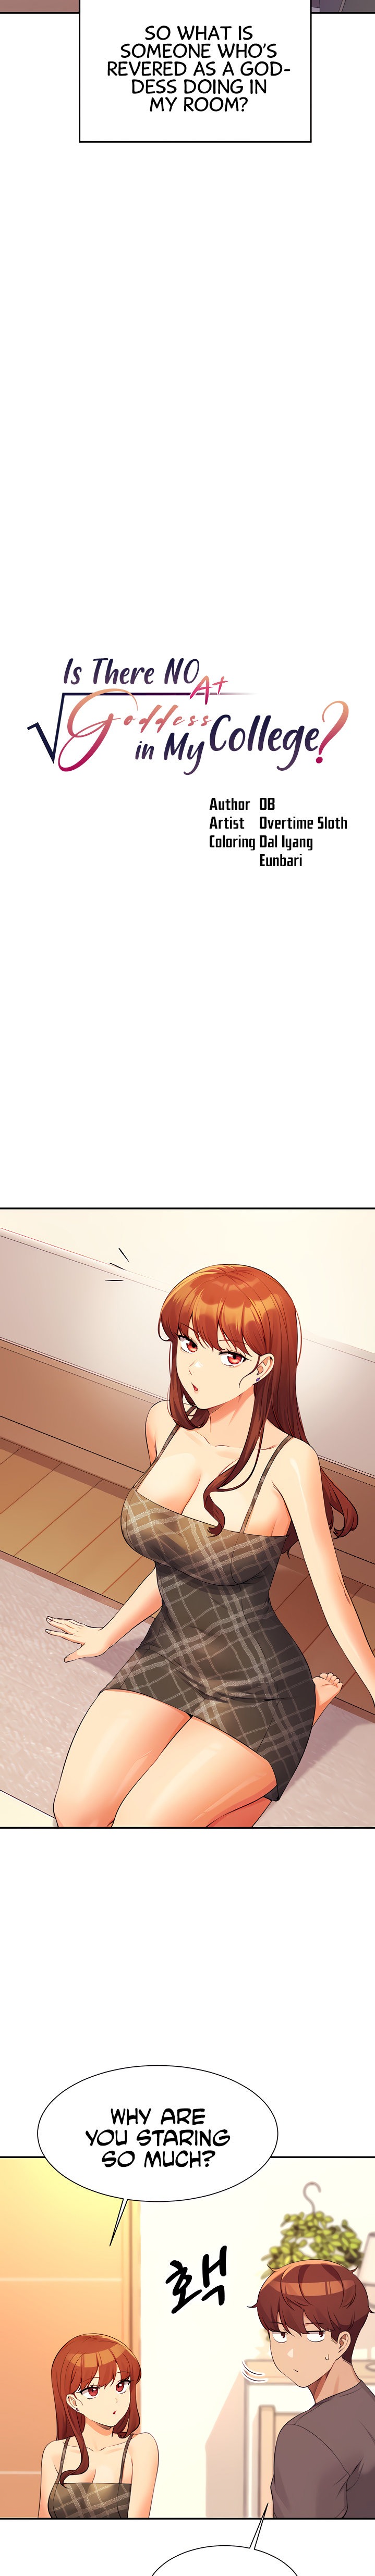 Is There No Goddess in My College? - Chapter 79 Page 3